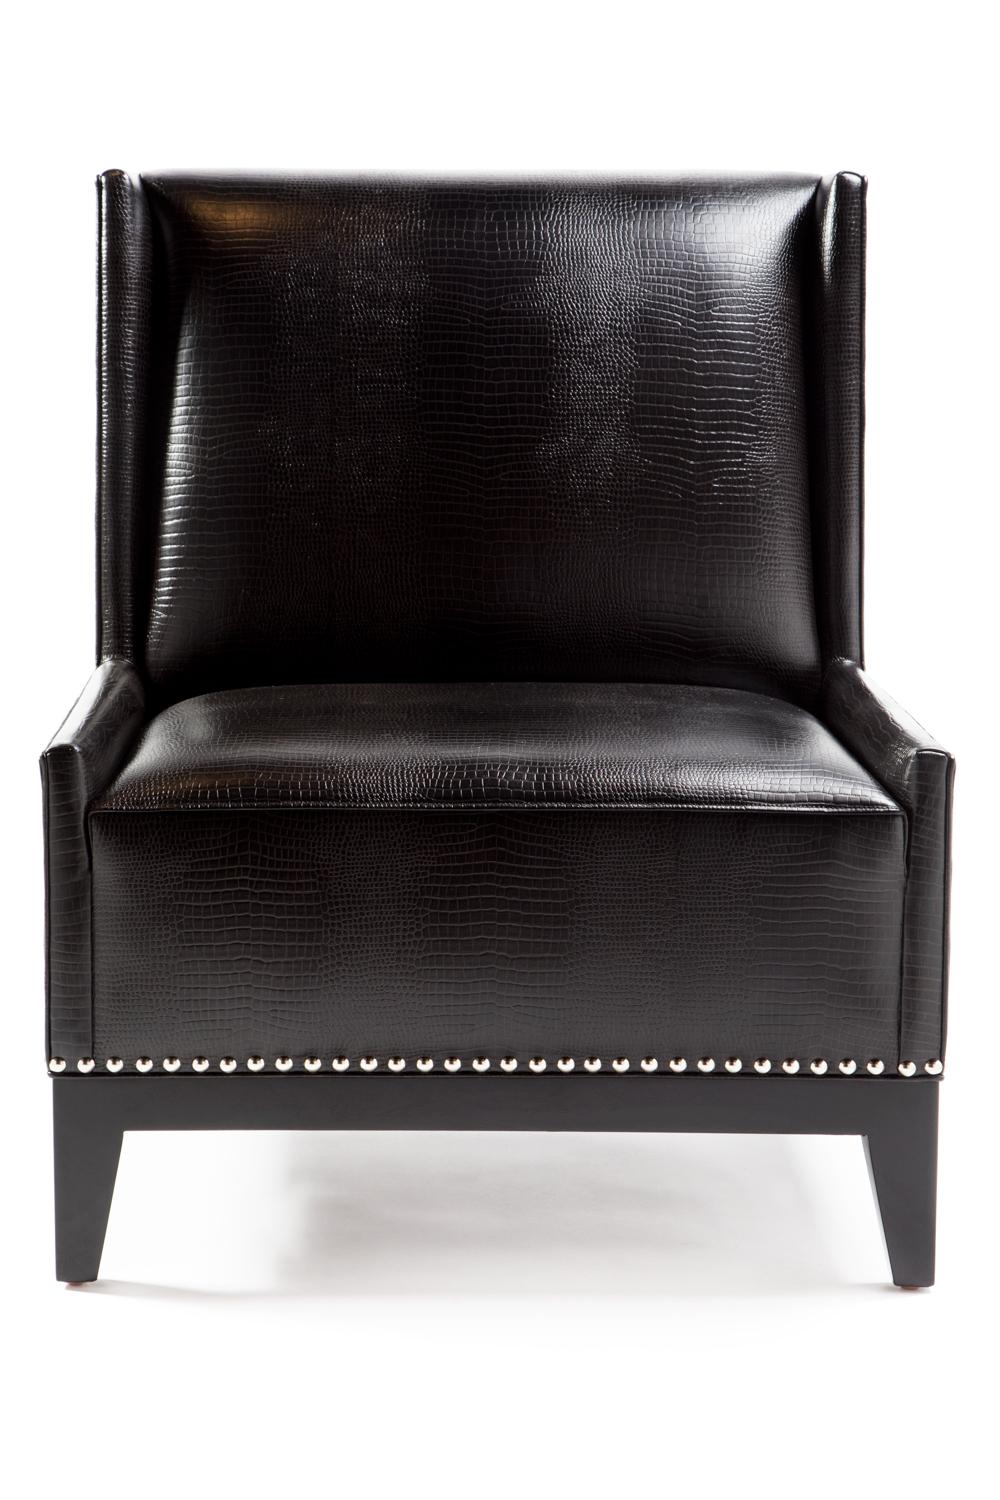 Hand-Crafted Contemporary Roma Chair Handcrafted by James by Jimmy Delaurentis For Sale